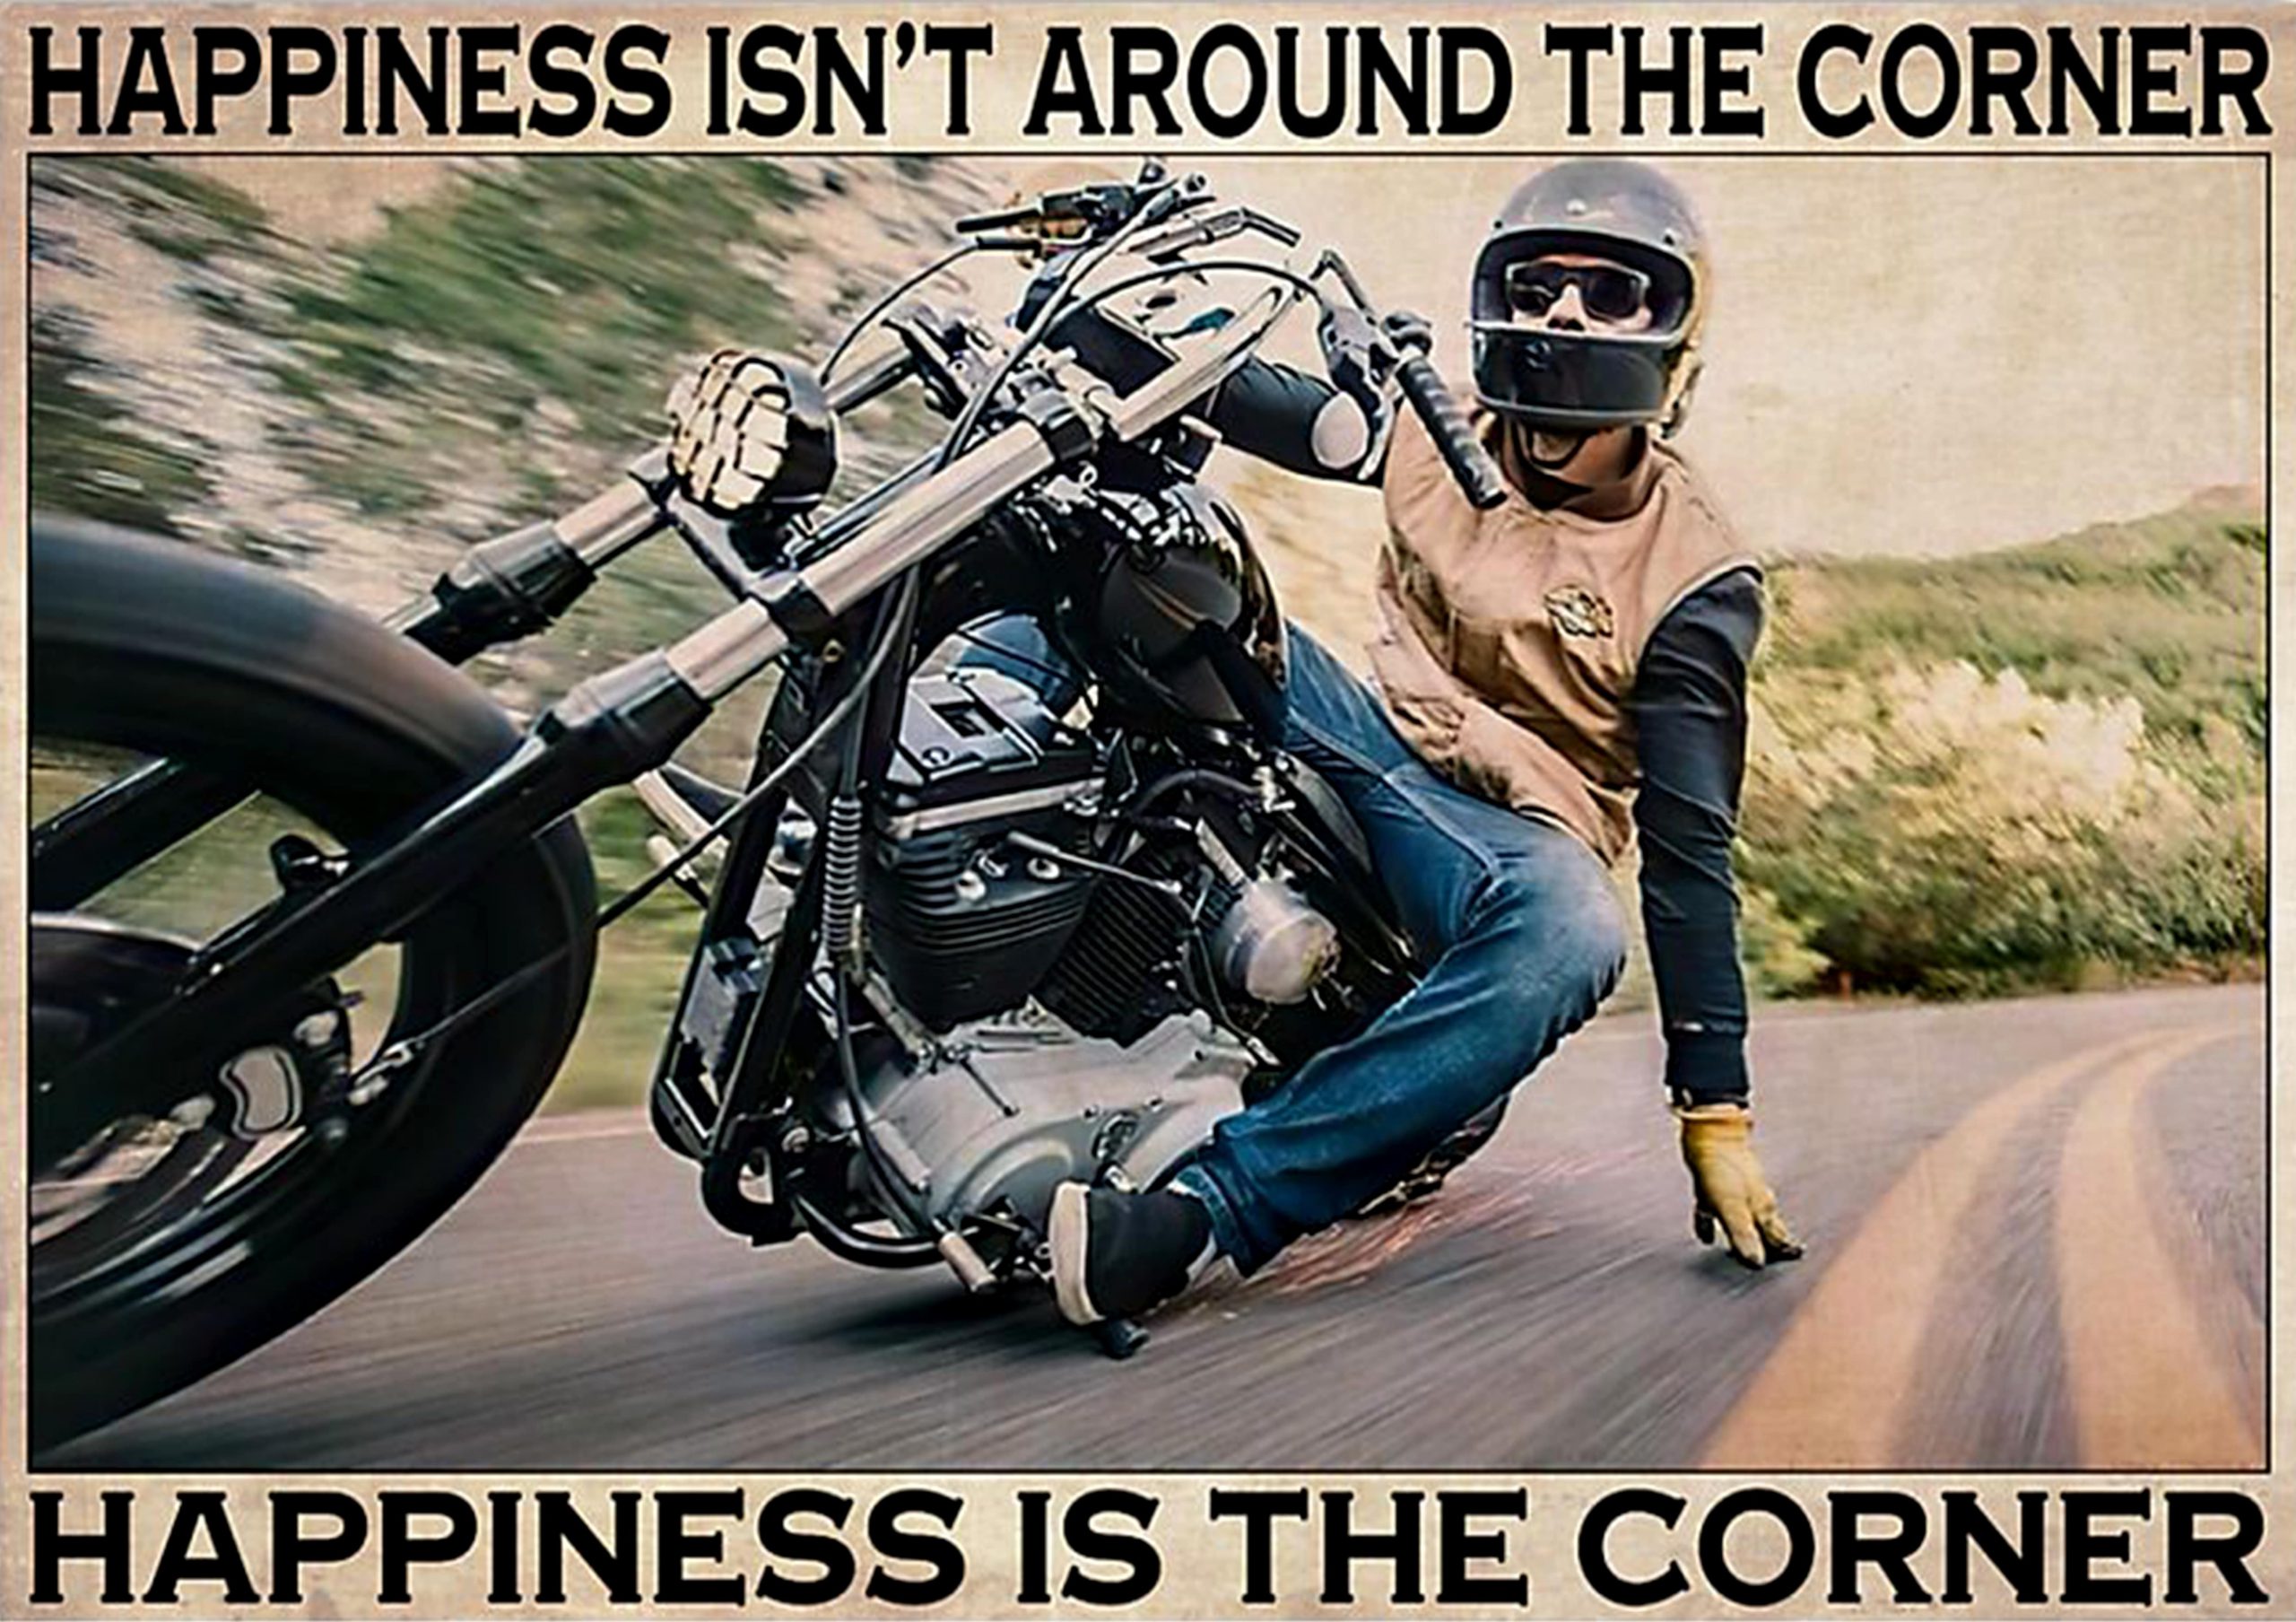 vintage motorcycle happiness isnt around the corner happiness is the corner poster 1 - Copy